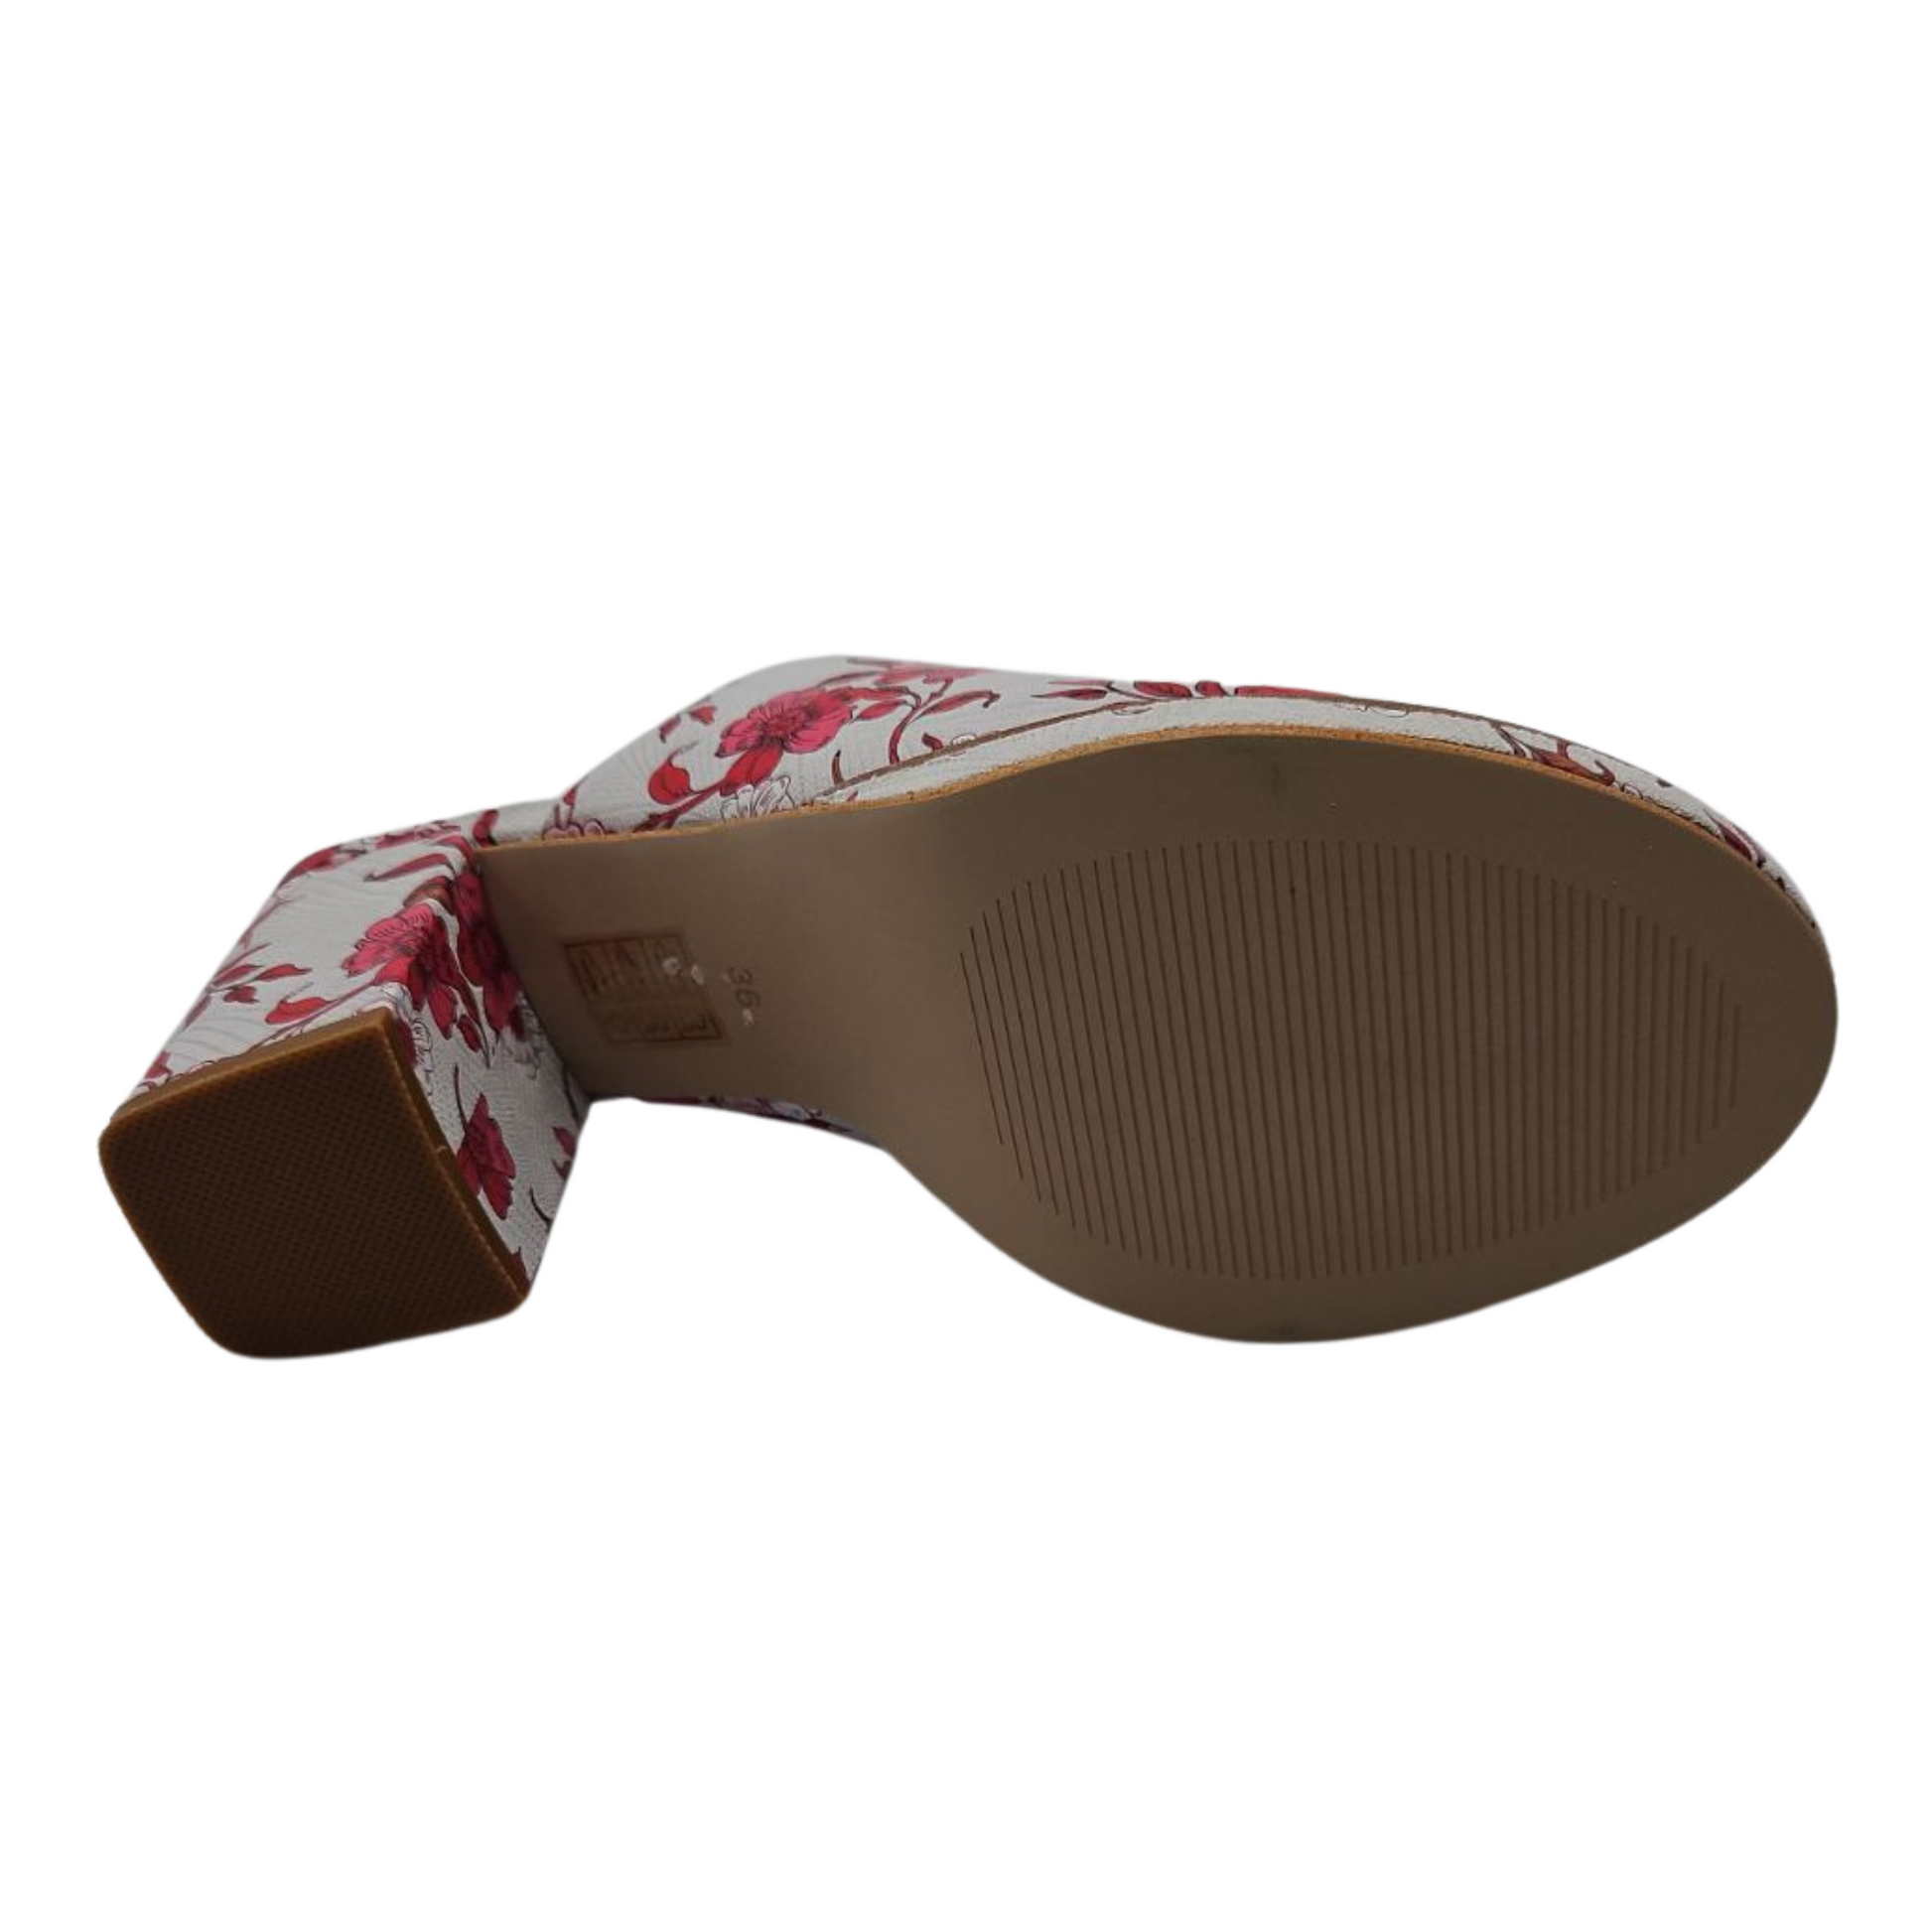 Bottom view of bold floral slip on sandal with wrapped block heel and cushioned footbed.